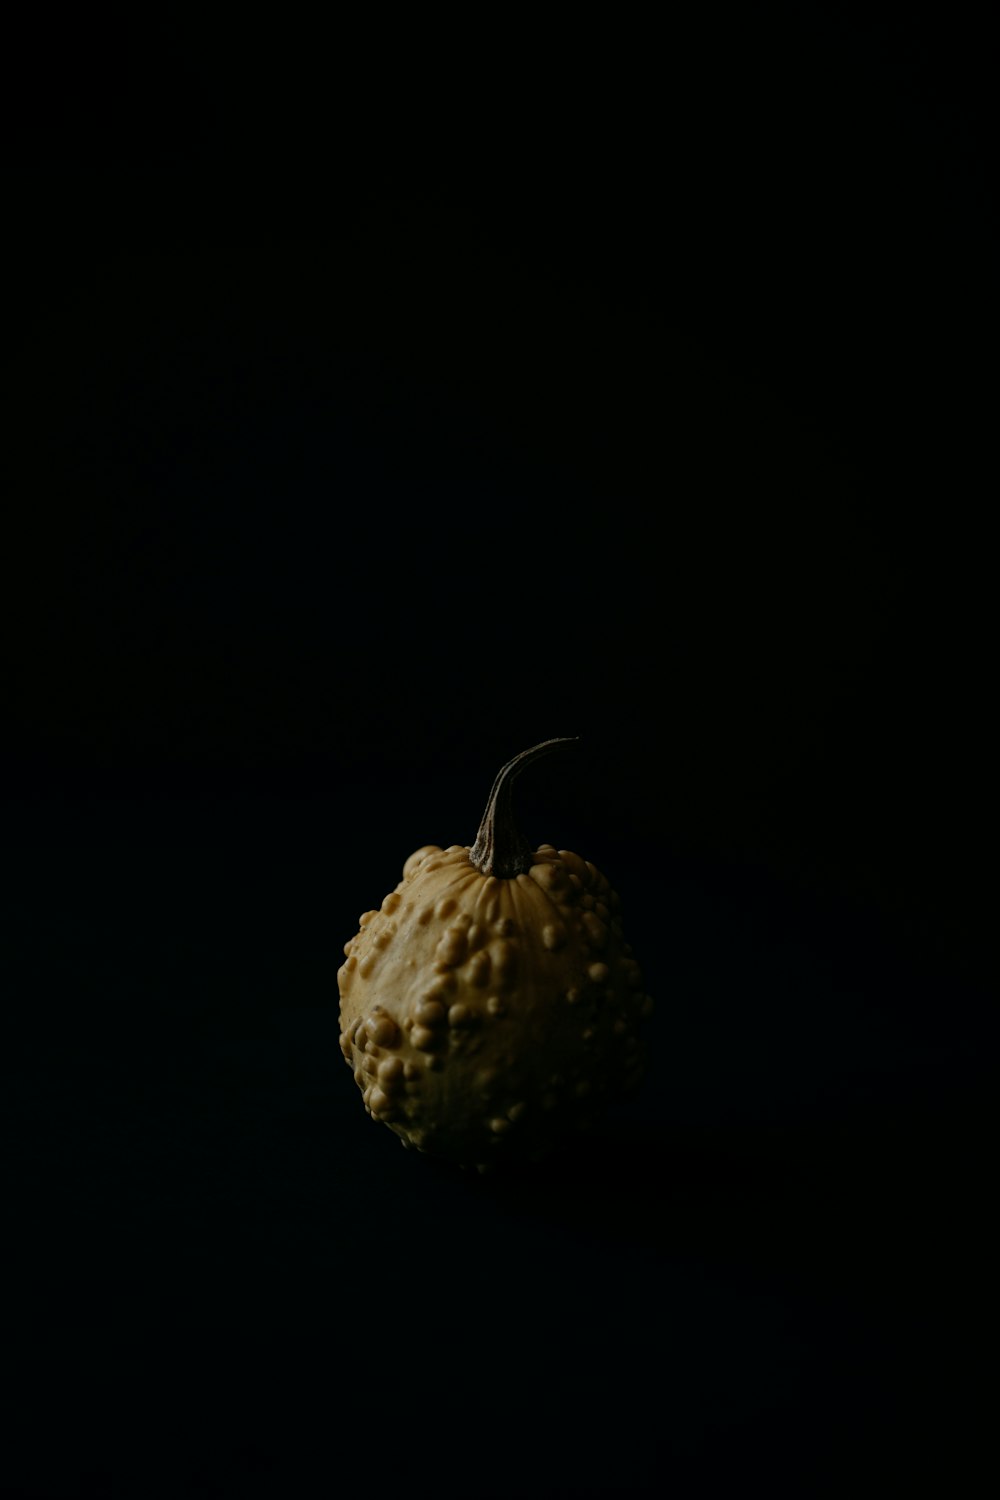 a close up of a fruit on a black background